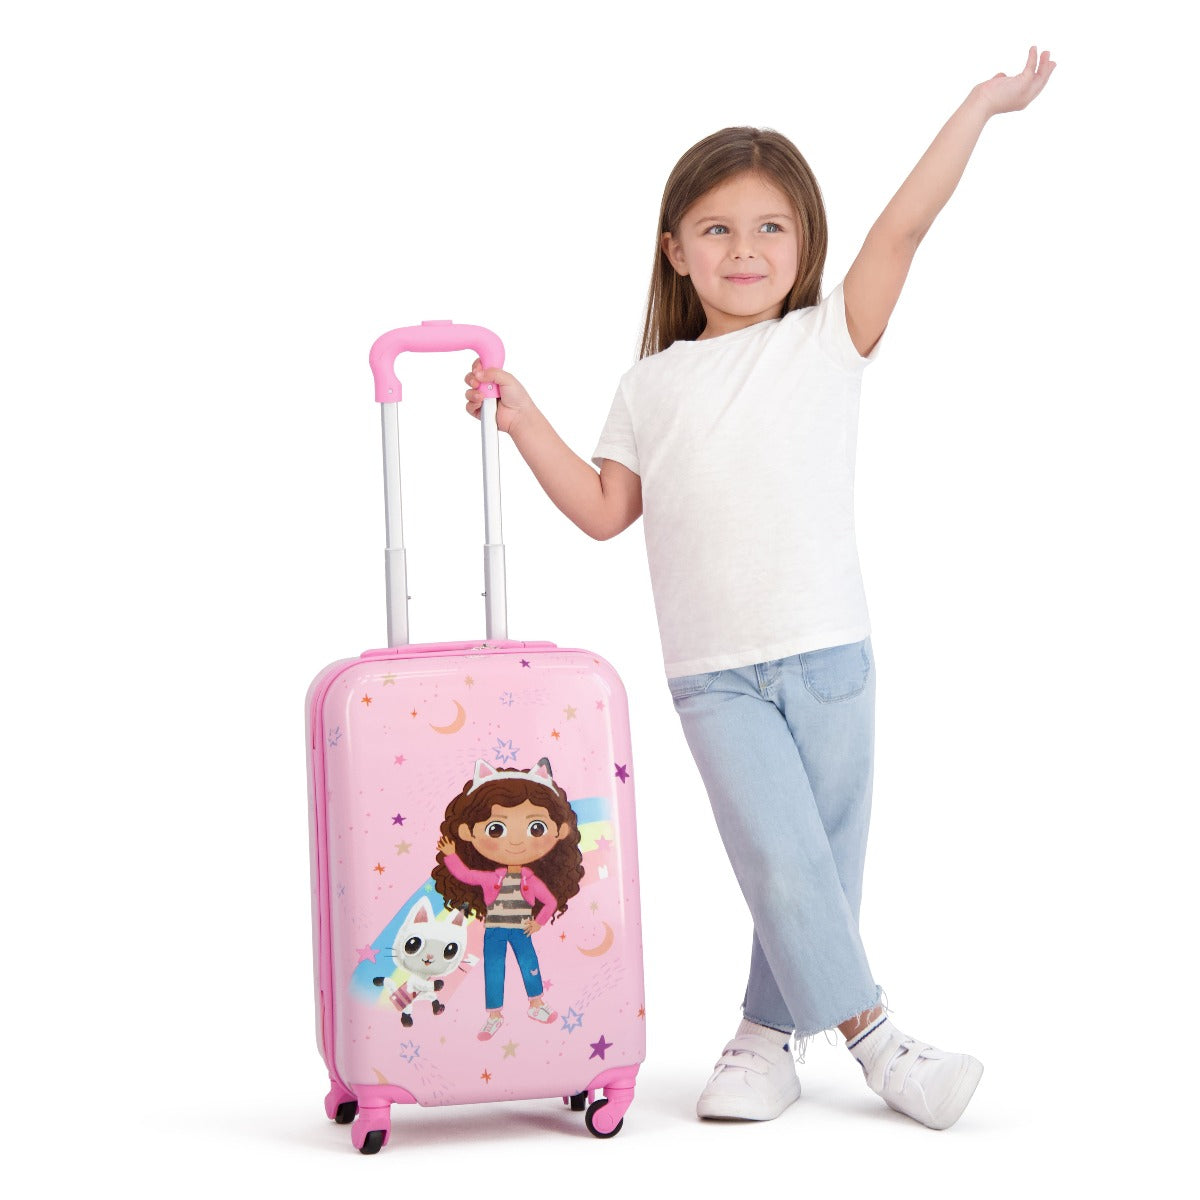 Pink Ful Gabby's Dollhouse sketch your dreams 21" luggage carry-on spinner suitcase for kids